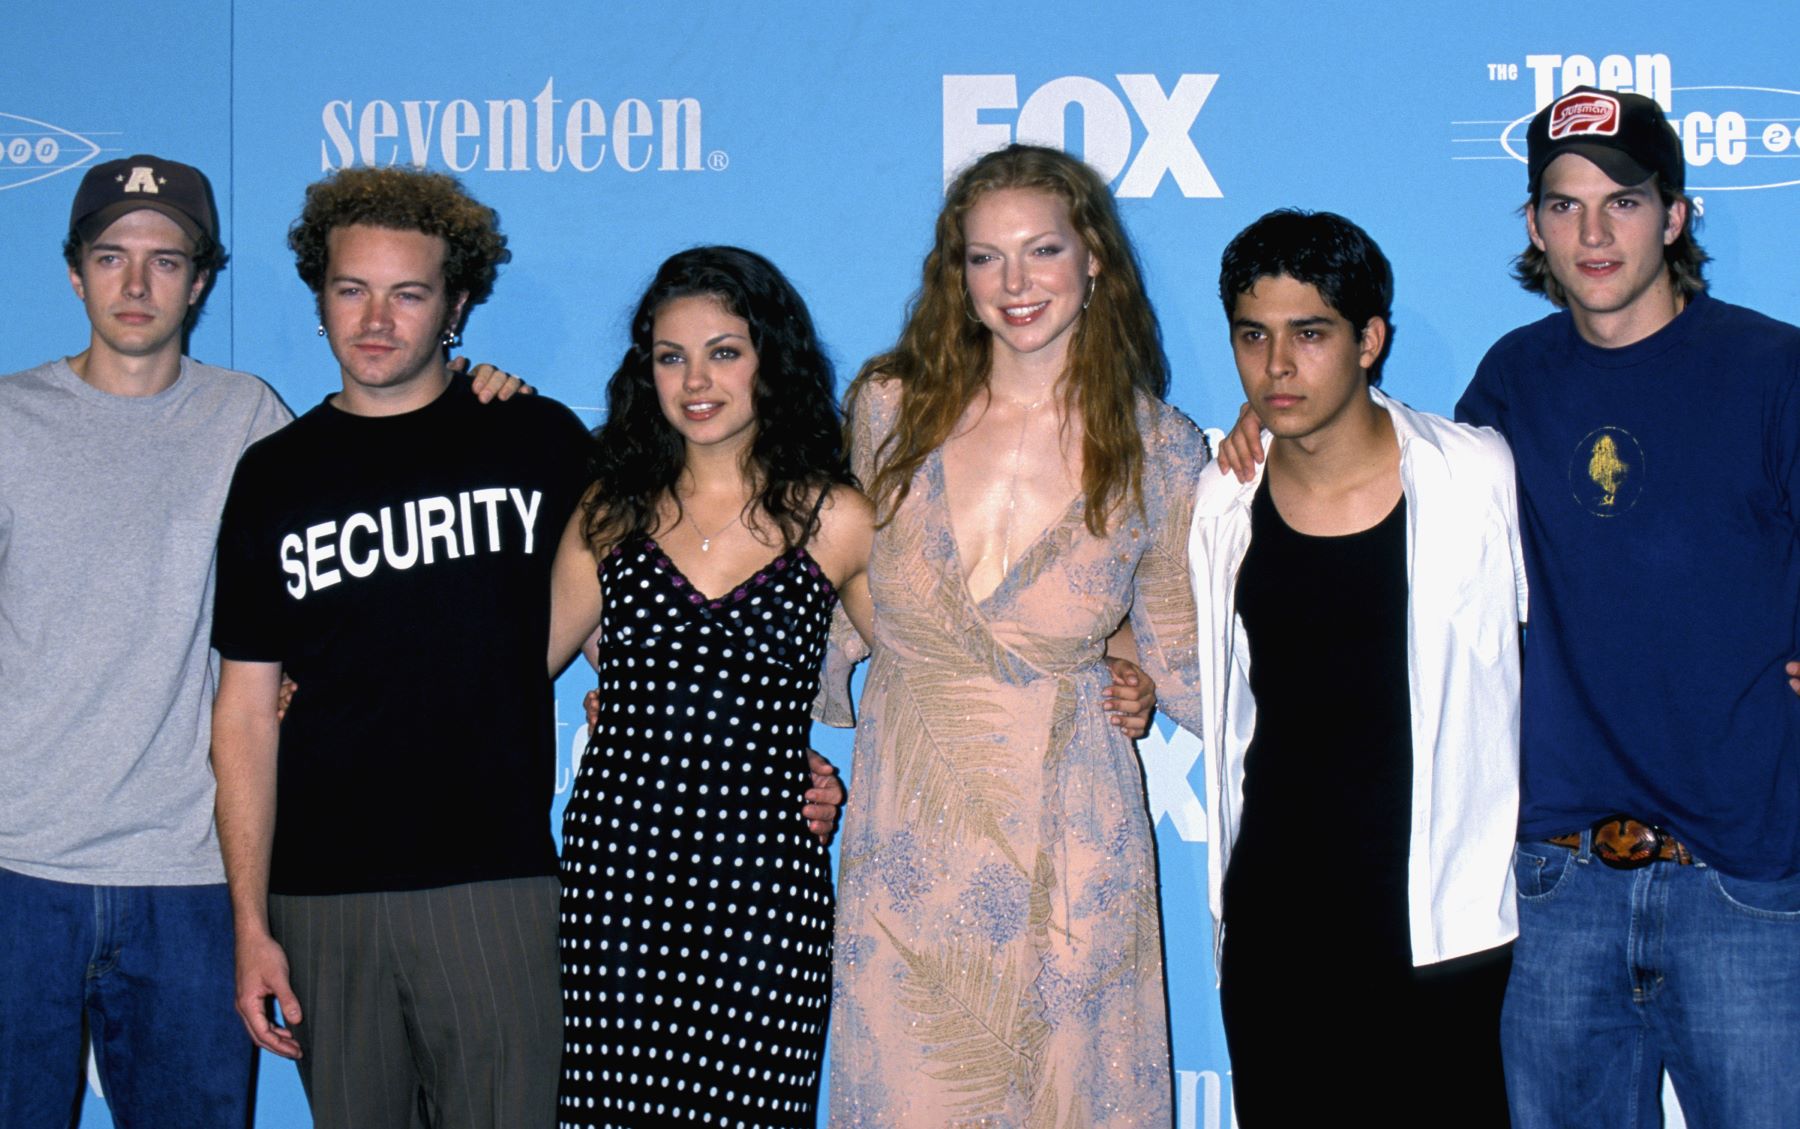 'That '70s Show' cast at the 2000 Teen Choice Awards